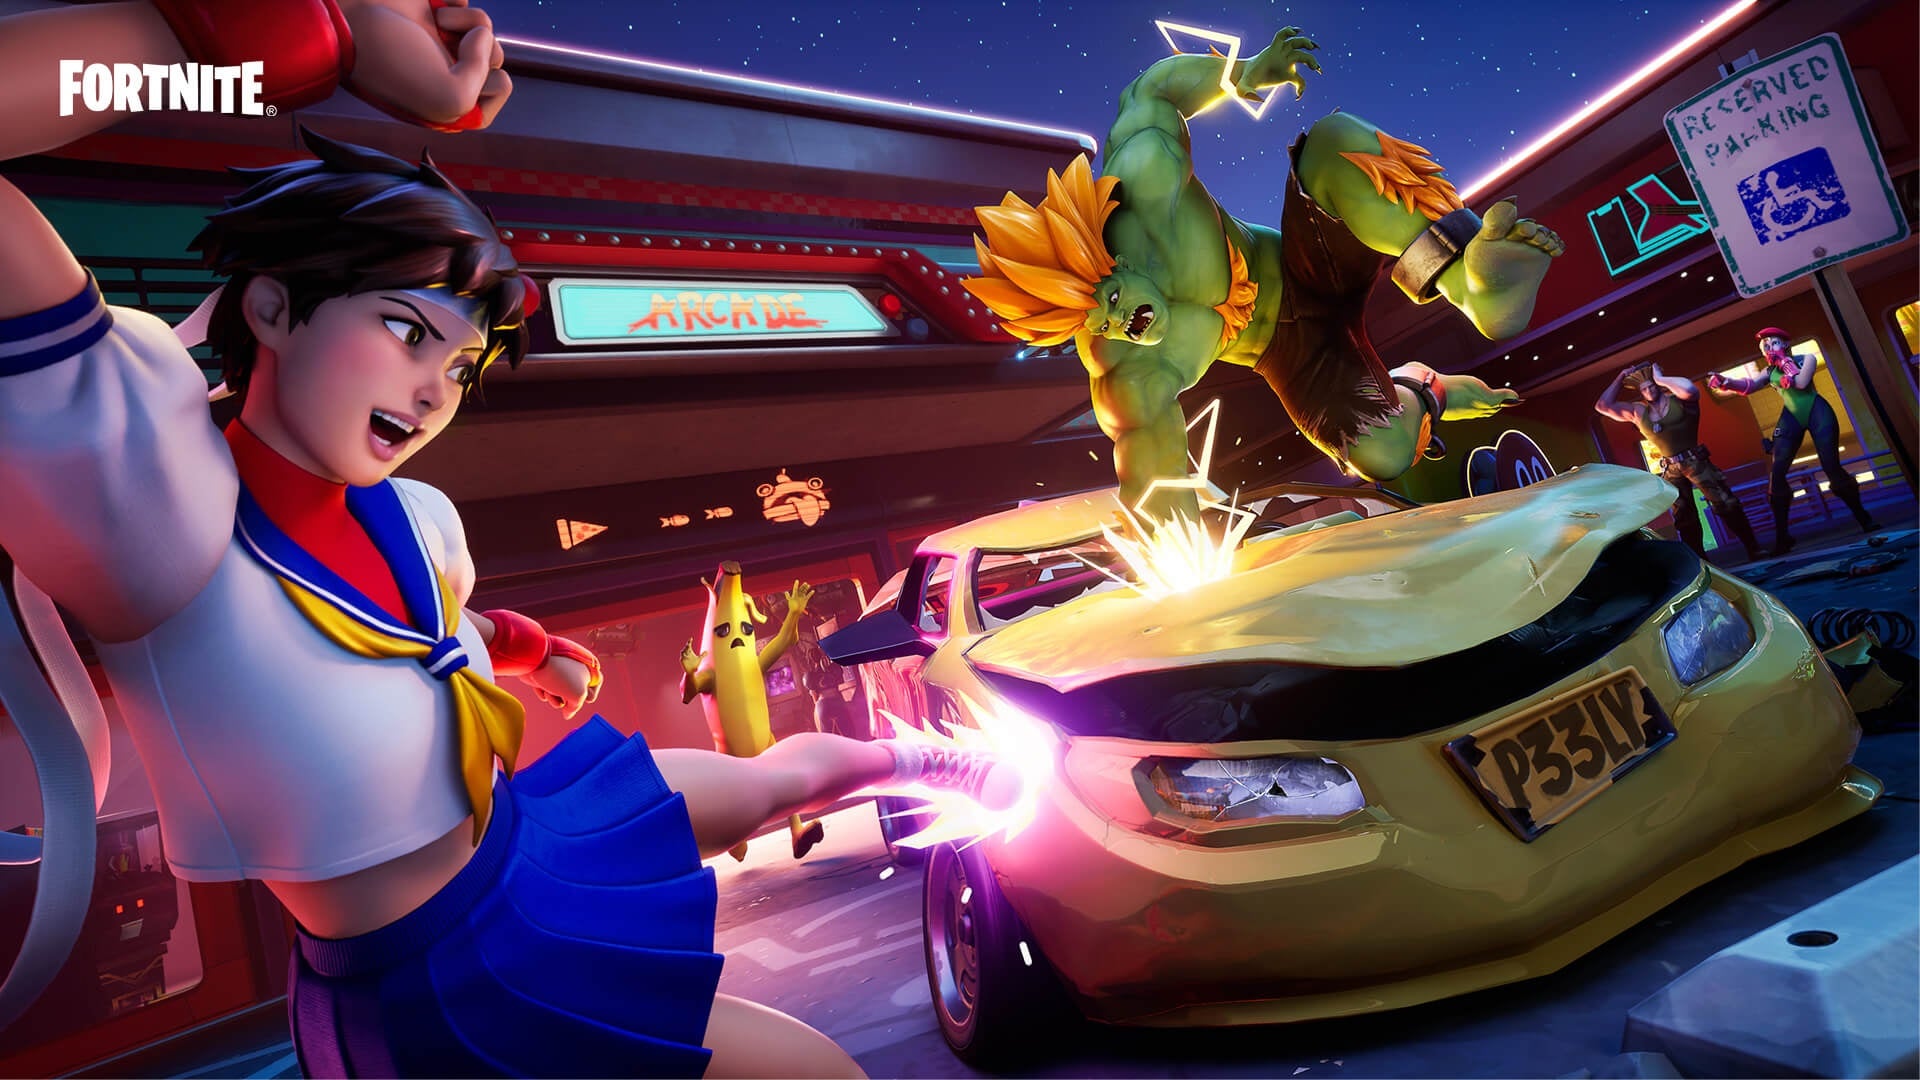 The loading screen of Sakura and Blanka where both characters are beating up a car.